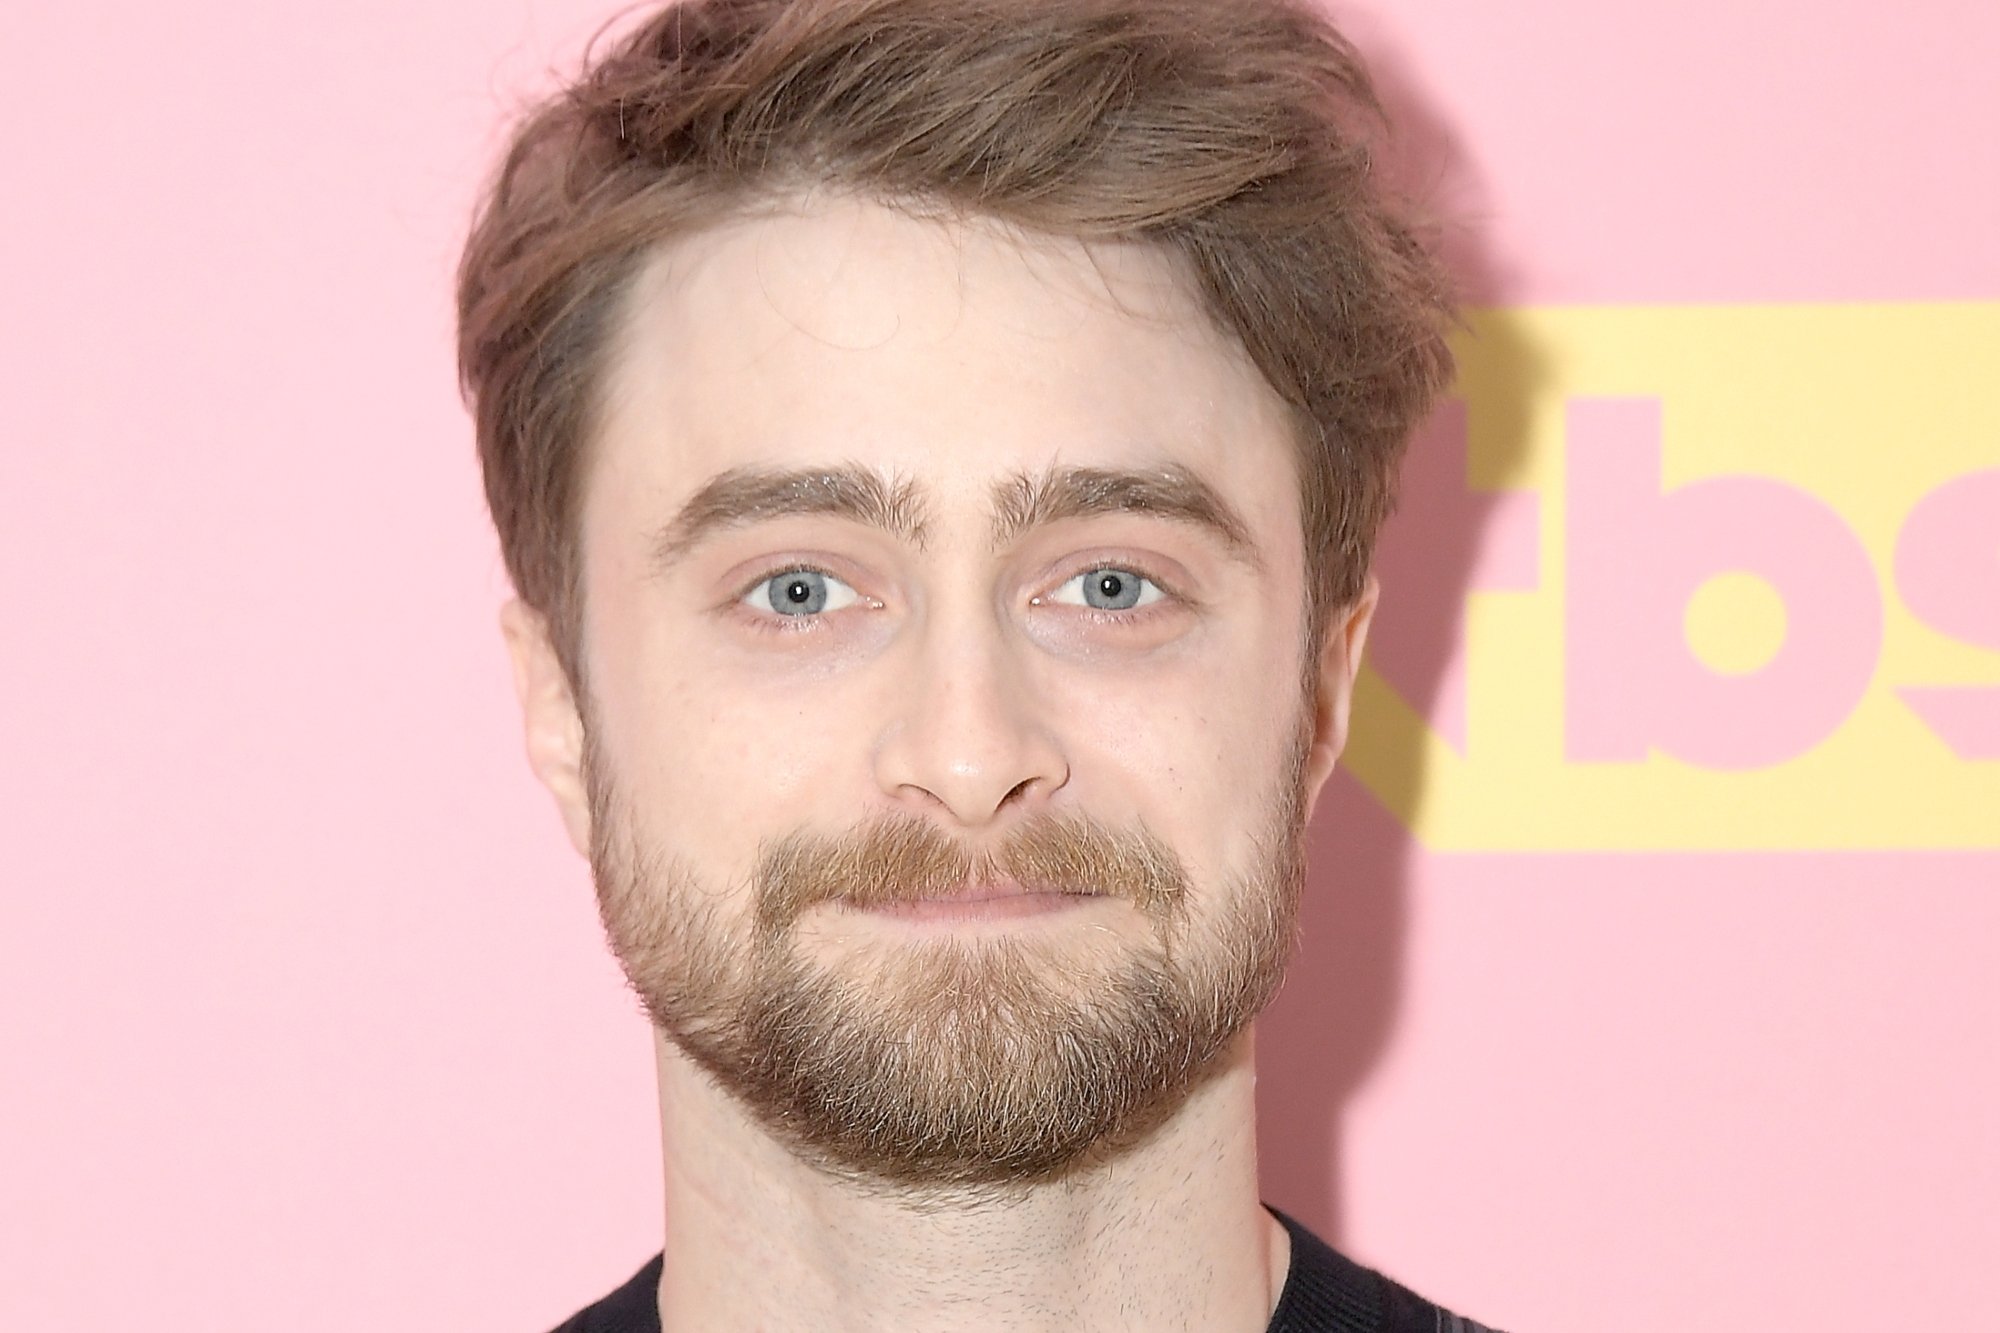 'Harry Potter' star Daniel Radcliffe with a closed-mouth smile on his face standing in front of a pink step and repeat